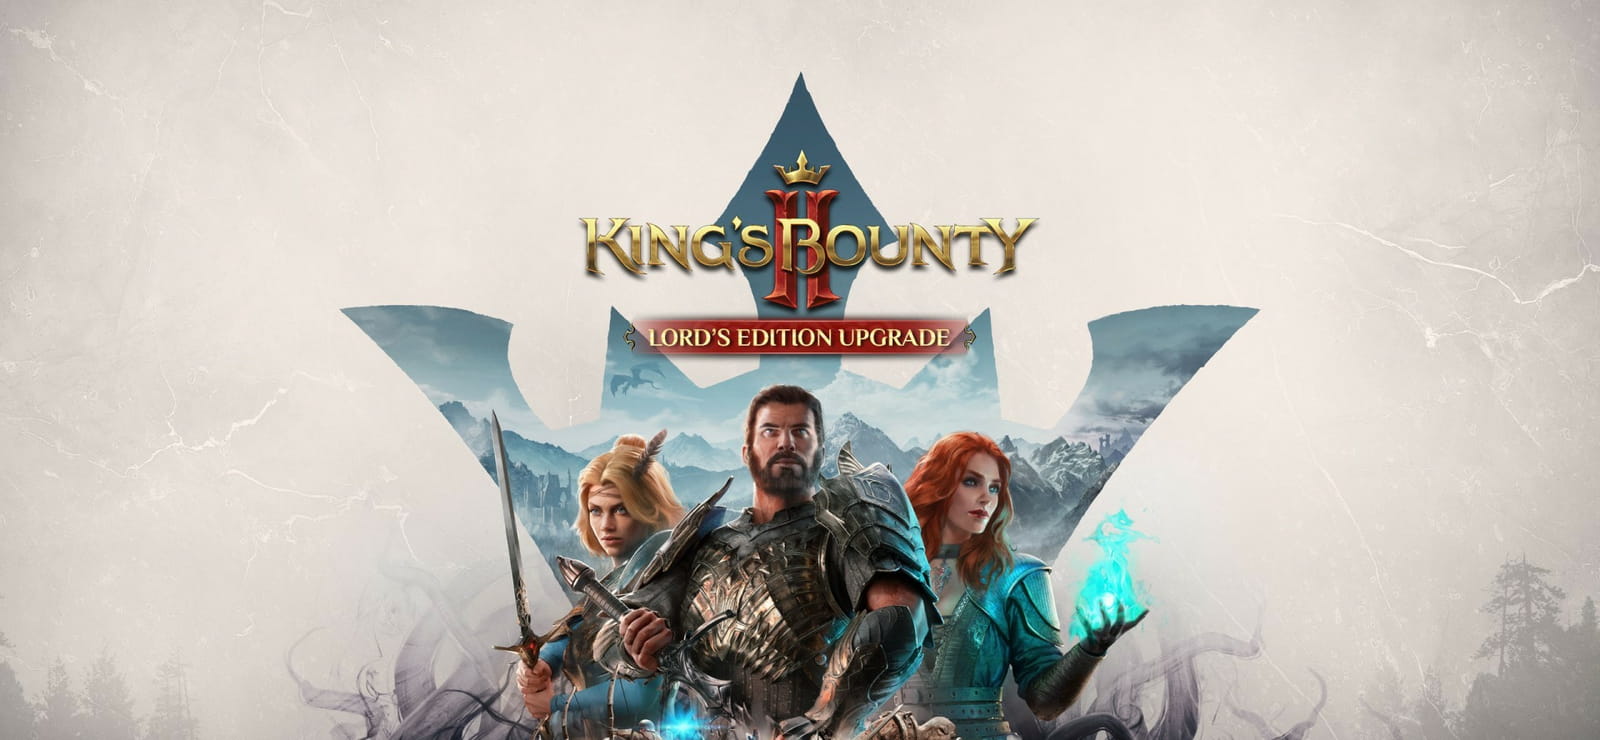 King's Bounty II - Lord's Edition Upgrade